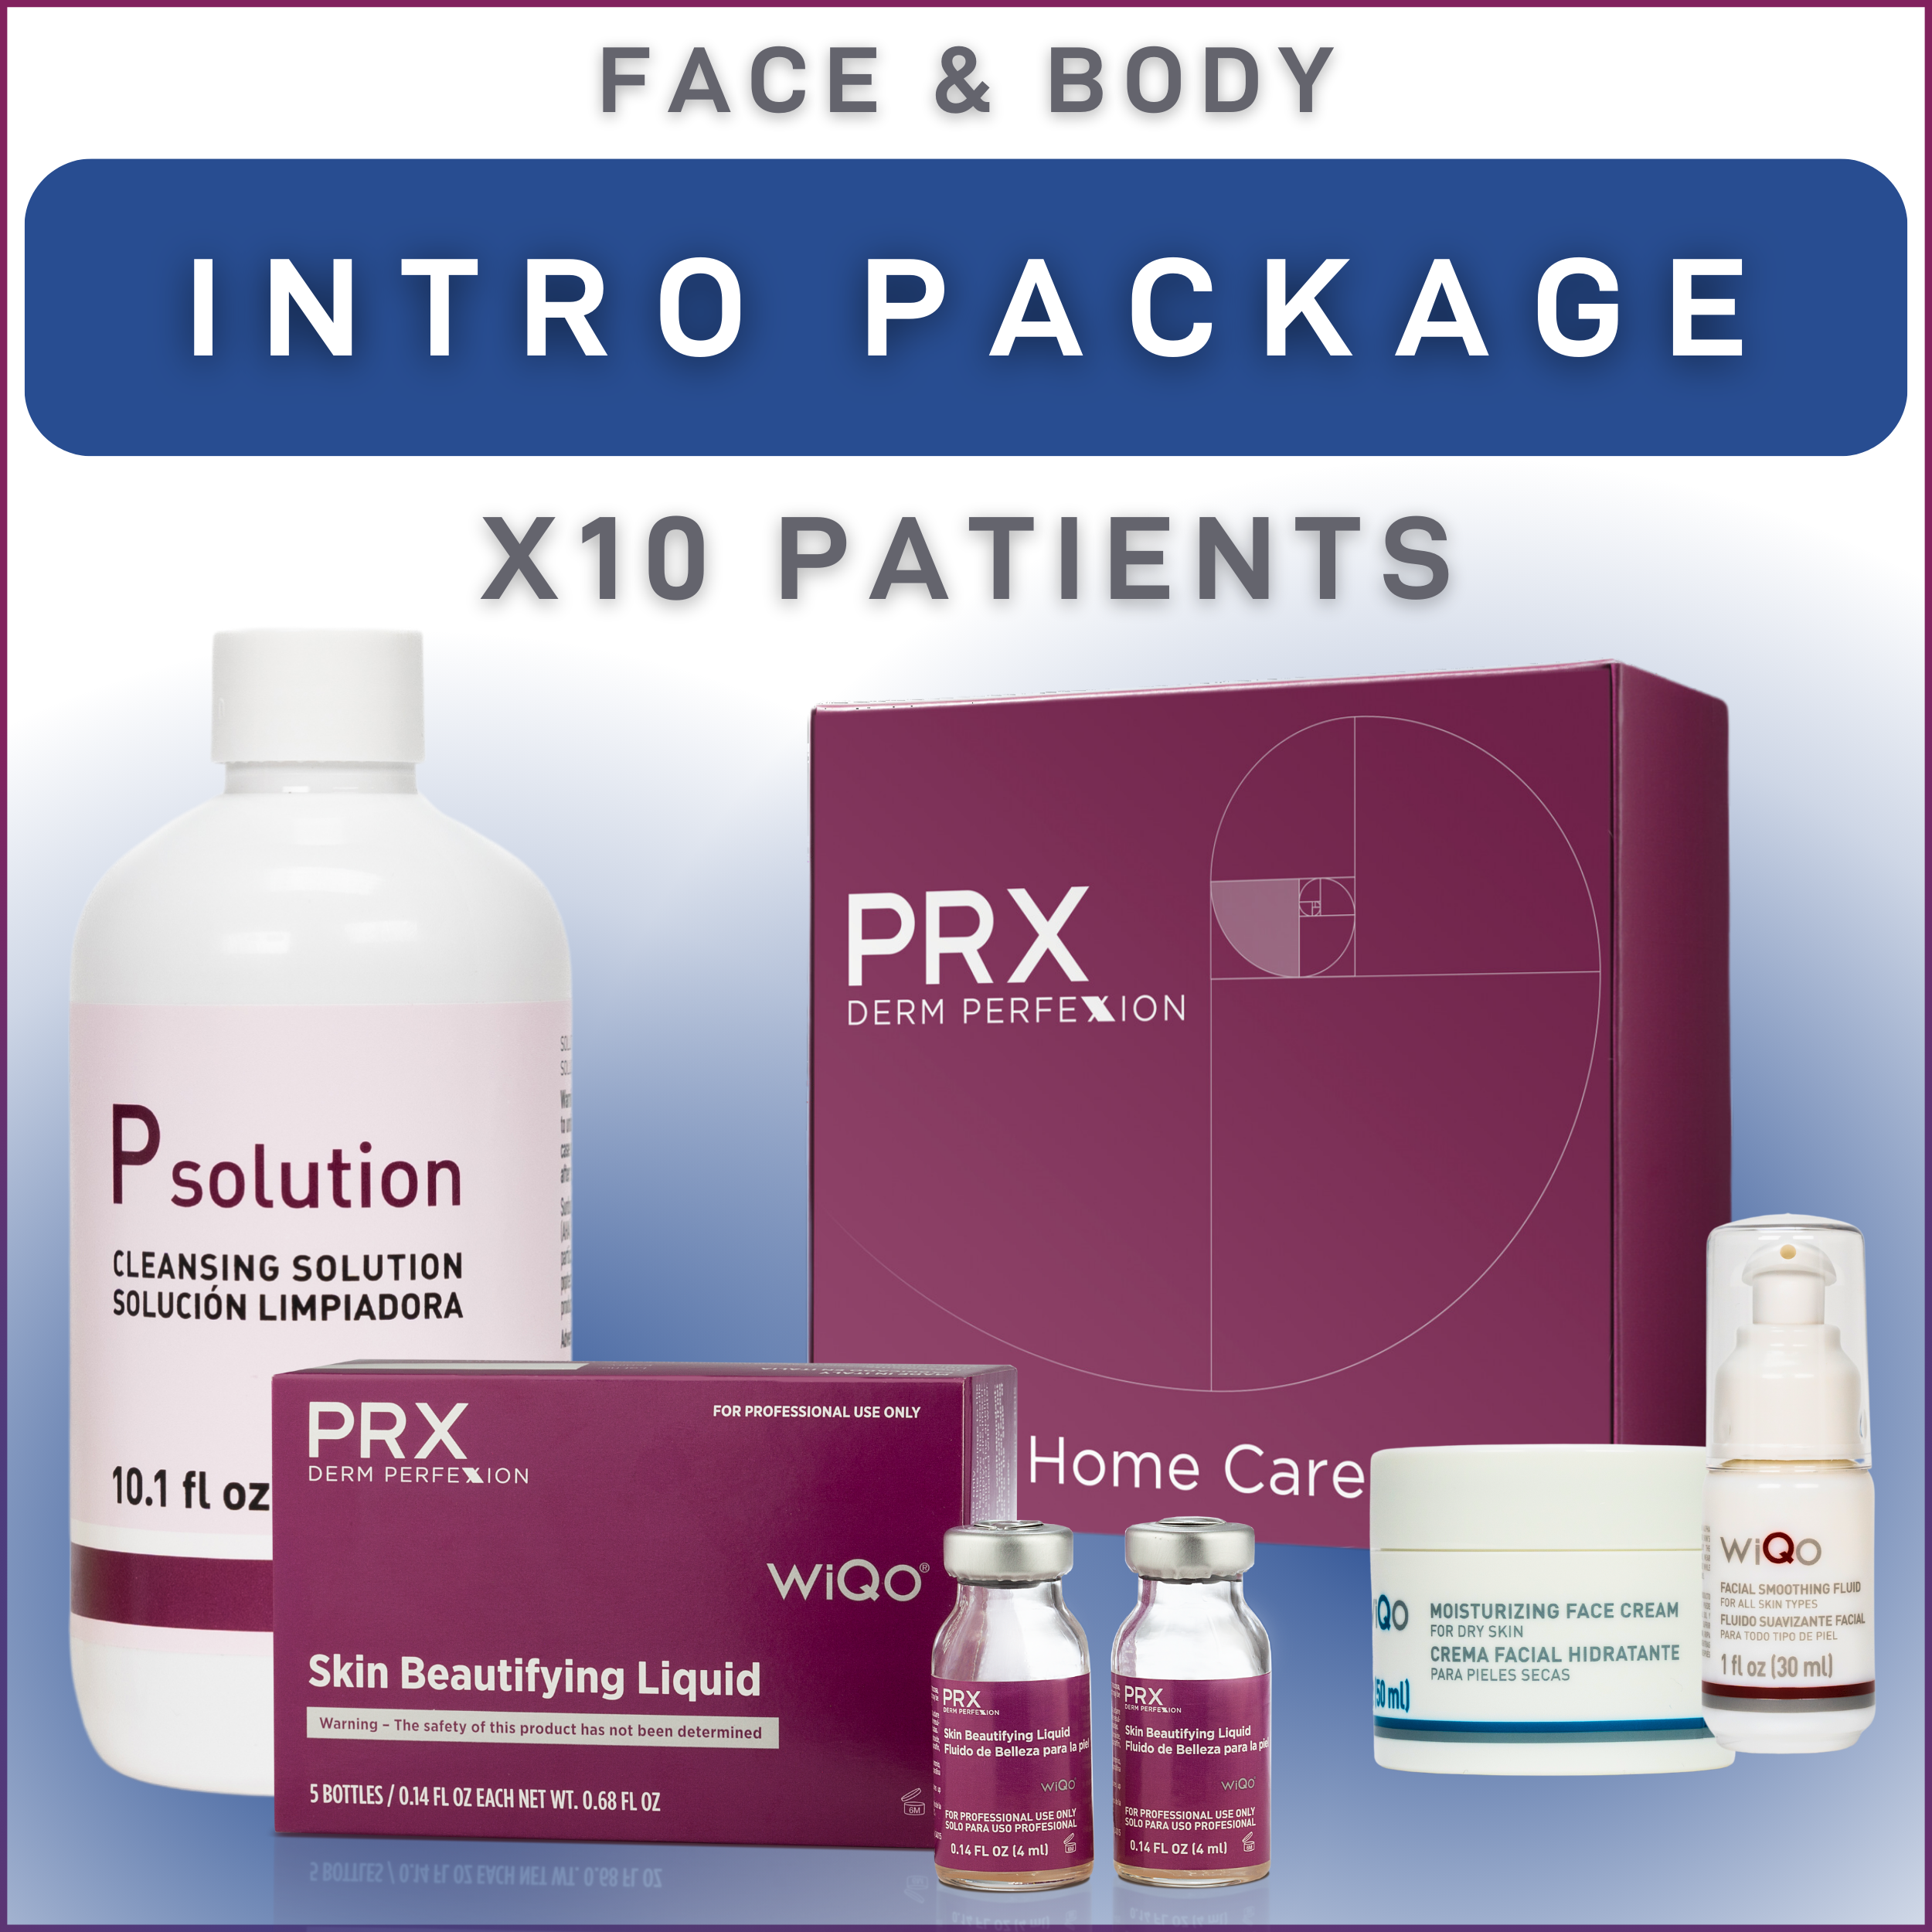 PRX DERM PERFEXION - New Customer Intro Face & Body Package